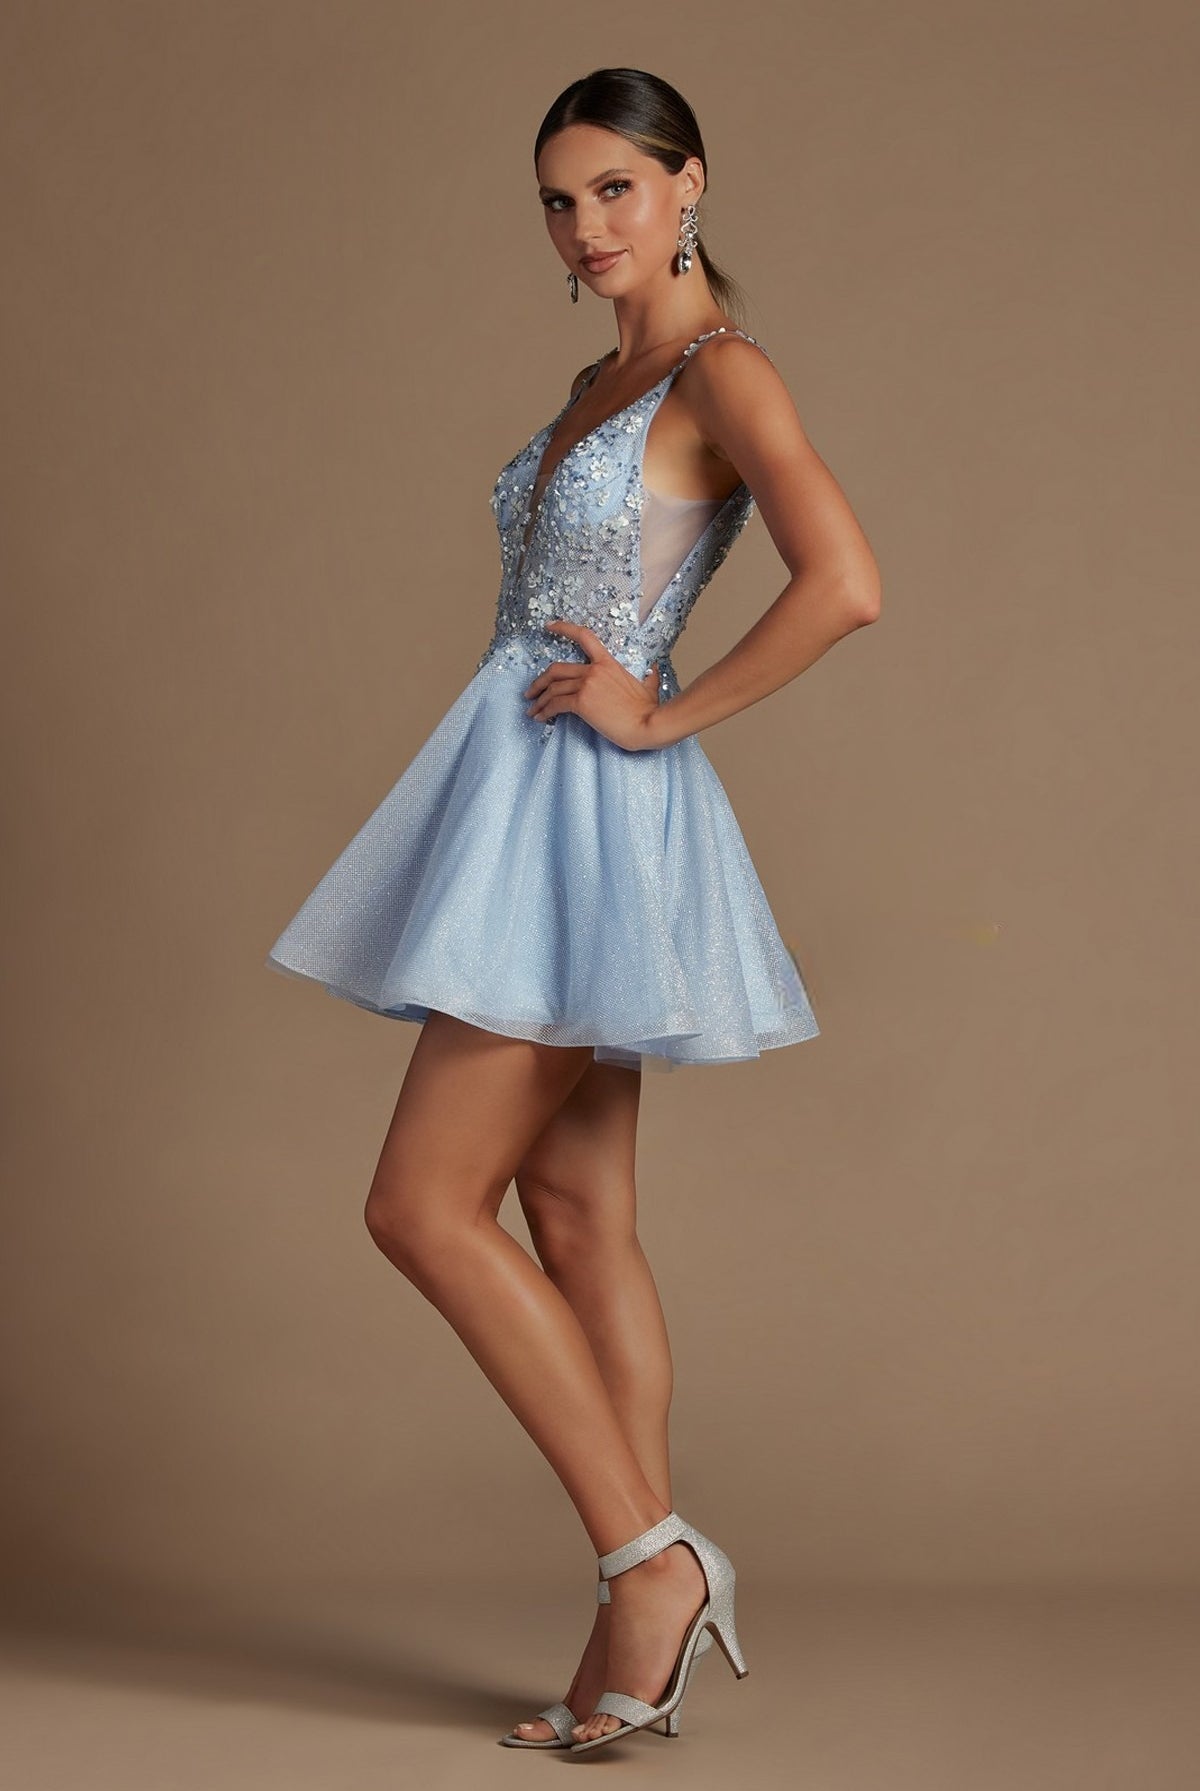 Glittery Floral Embroidered Bodice Short Dress for Homecoming & Cocktail-smcdress